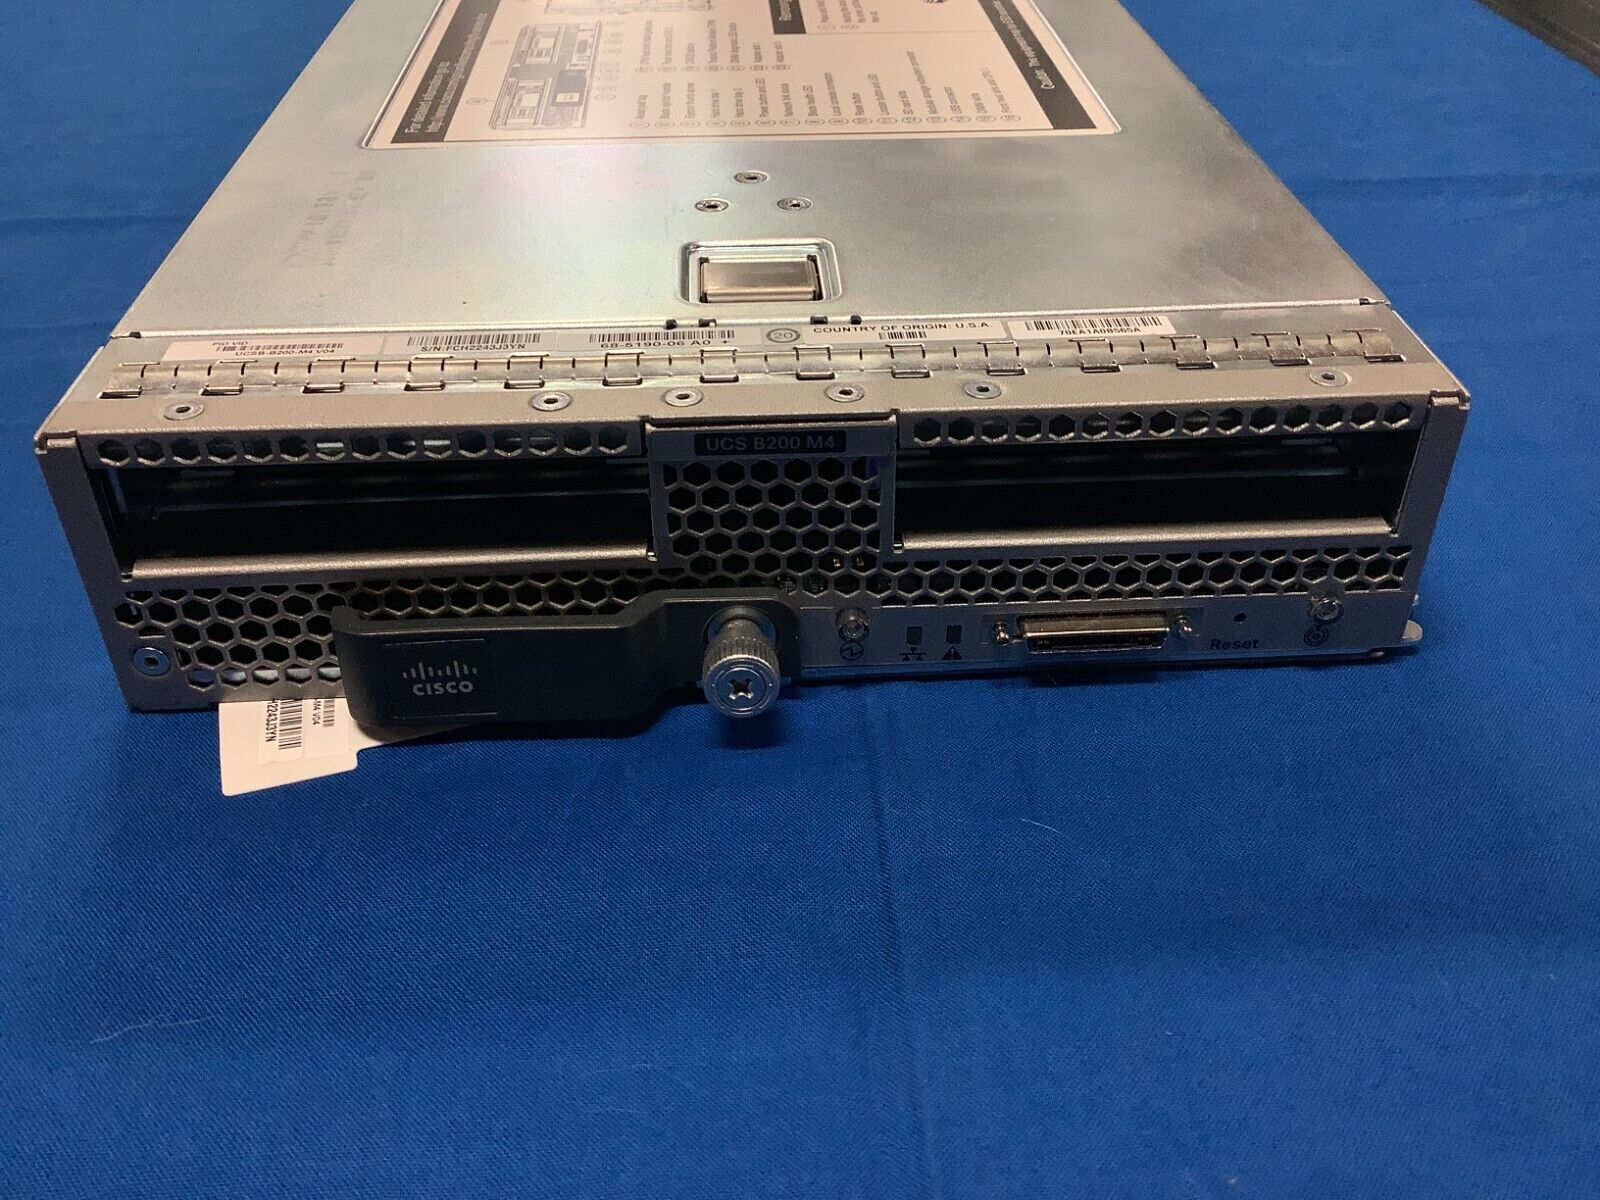 Cisco UCSB-B200-M4 Blade Server Chassis 73-15862-06 with back No RAM and CPU